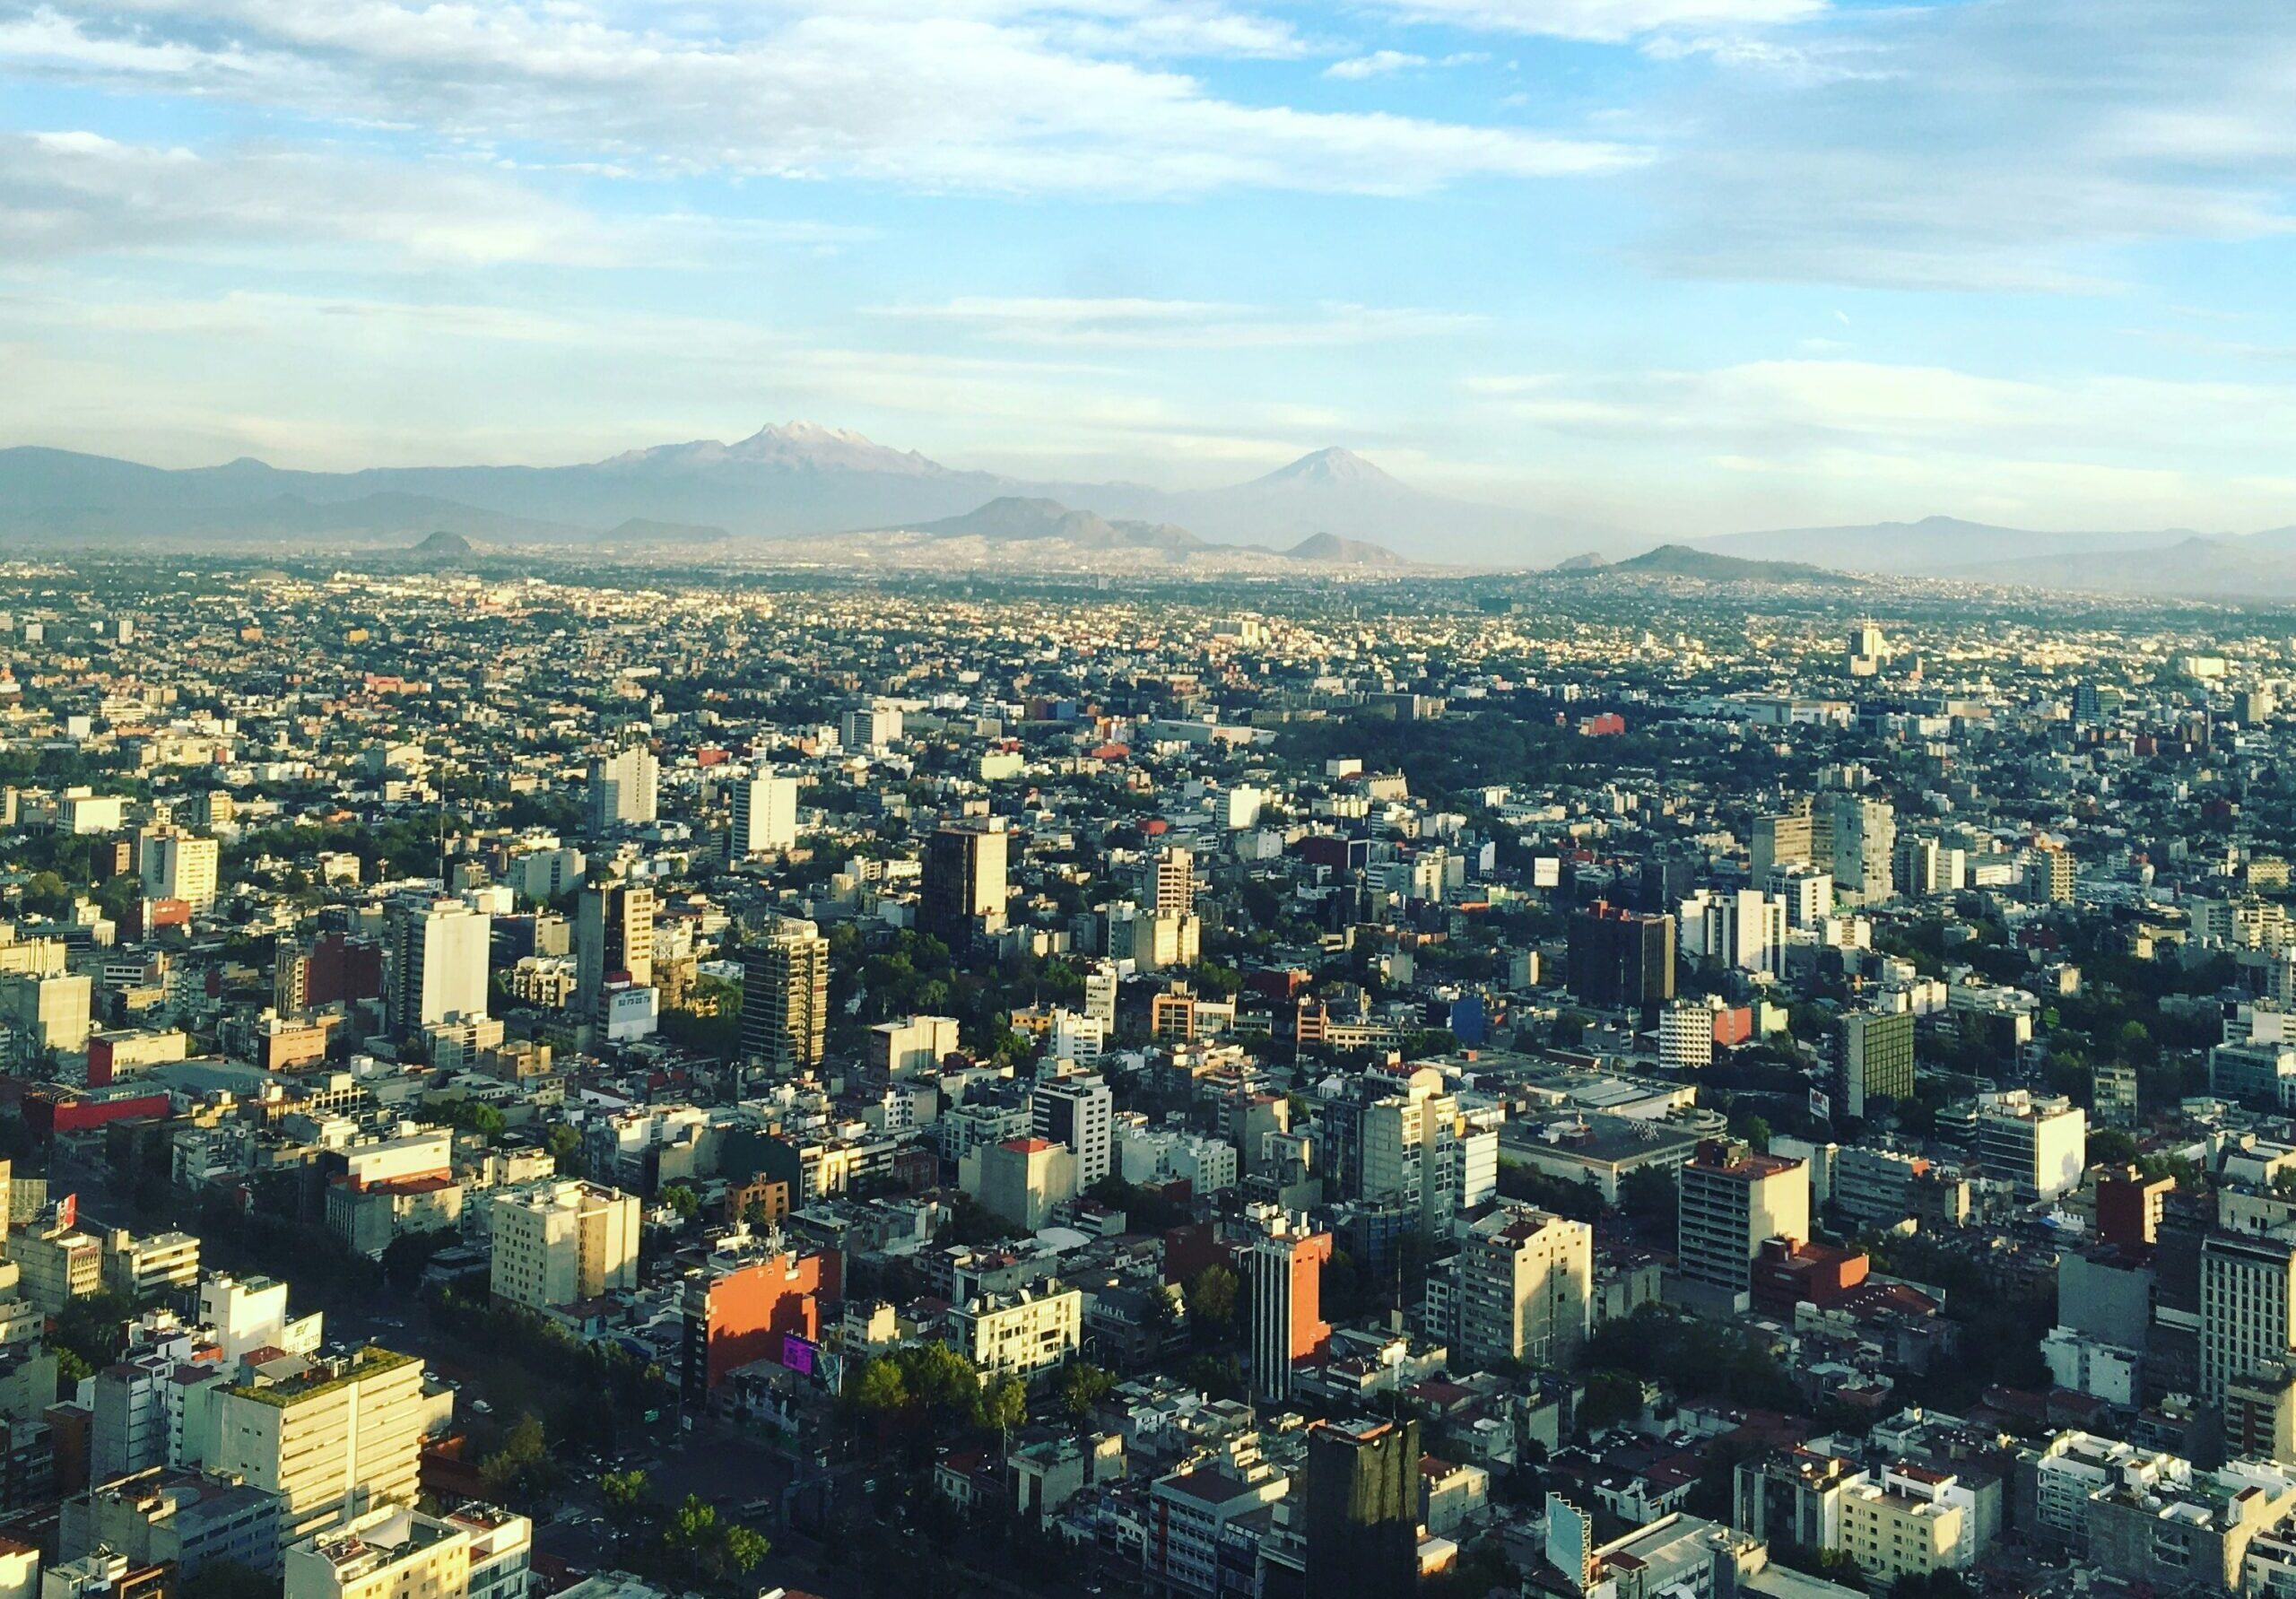 An aerial photo of Mexico city with dense buildings and mountains in the background